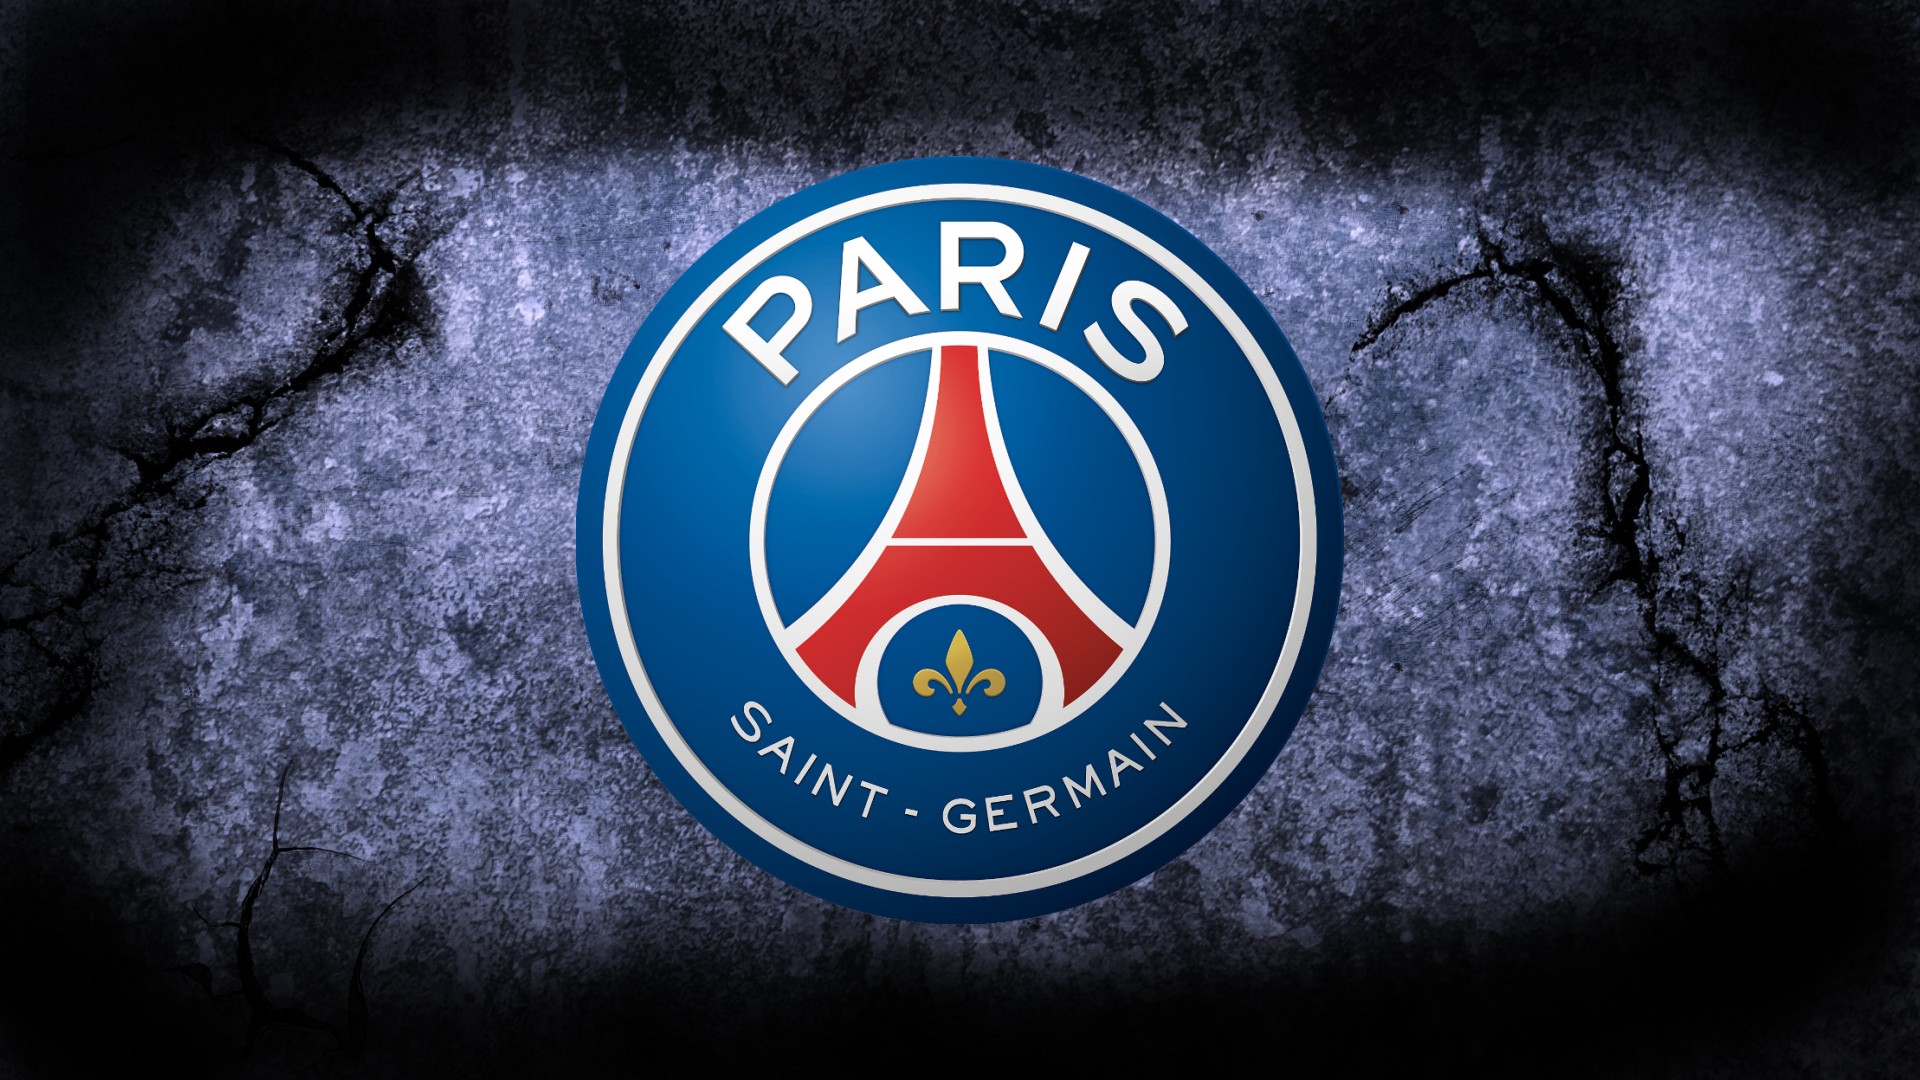 Wallpapers HD PSG with resolution 1920x1080 pixel. You can make this wallpaper for your Mac or Windows Desktop Background, iPhone, Android or Tablet and another Smartphone device